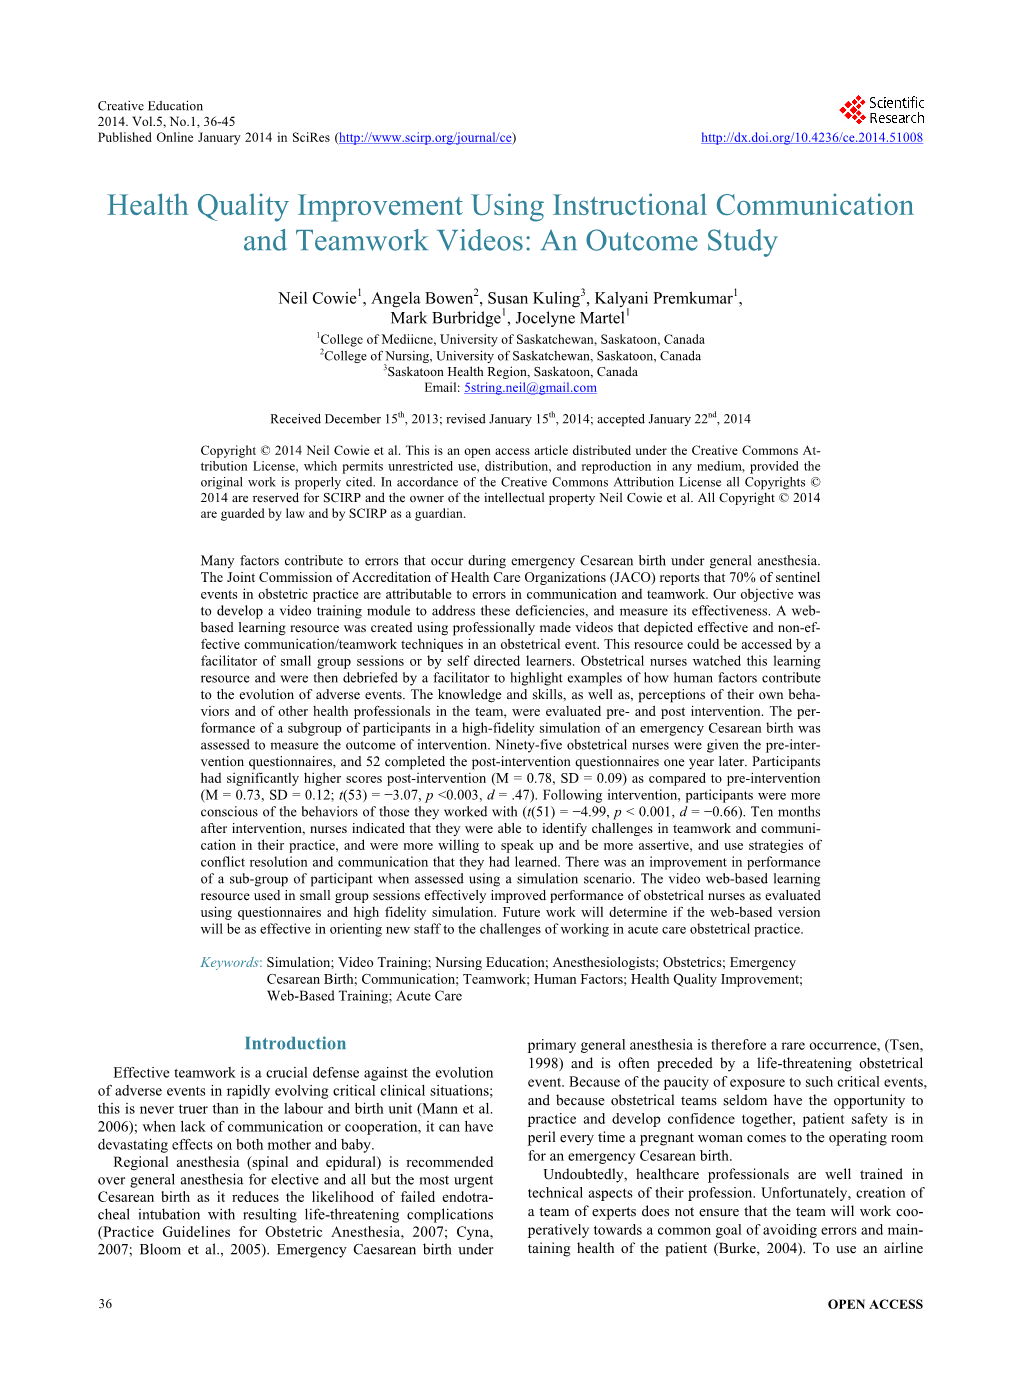 Health Quality Improvement Using Instructional Communication and Teamwork Videos: an Outcome Study